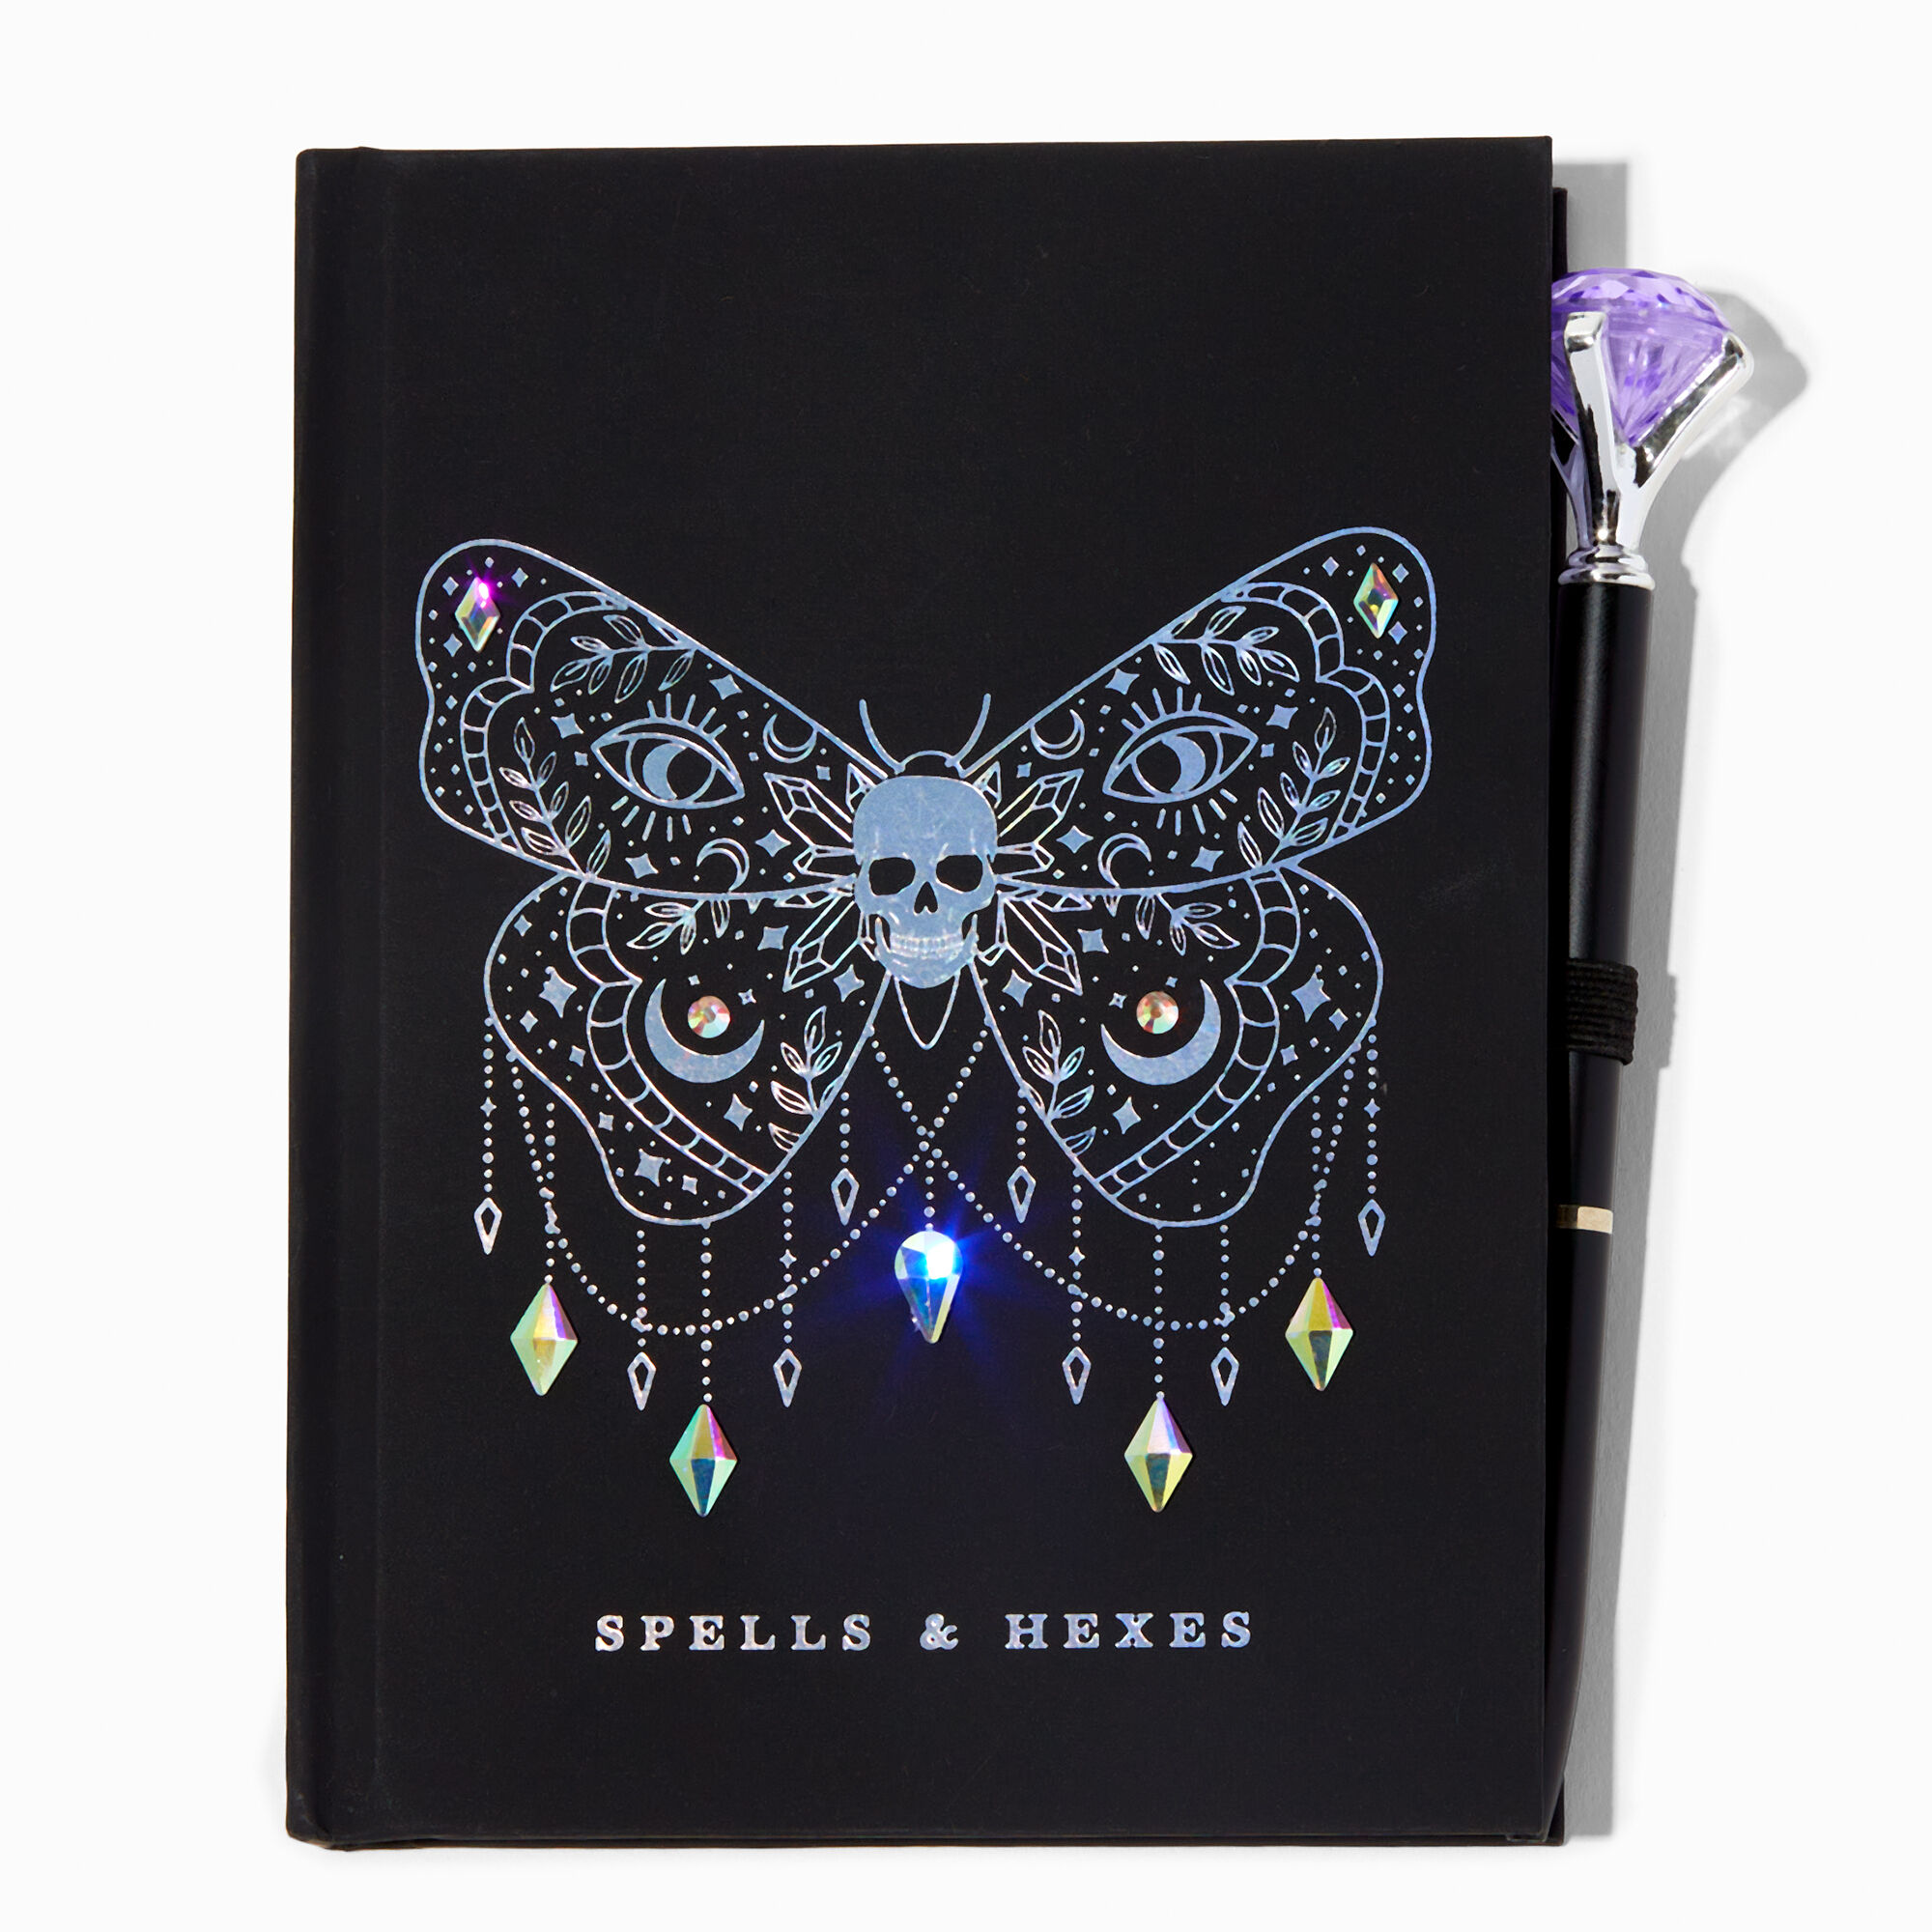 View Claires spells Hexes Lined Journal information